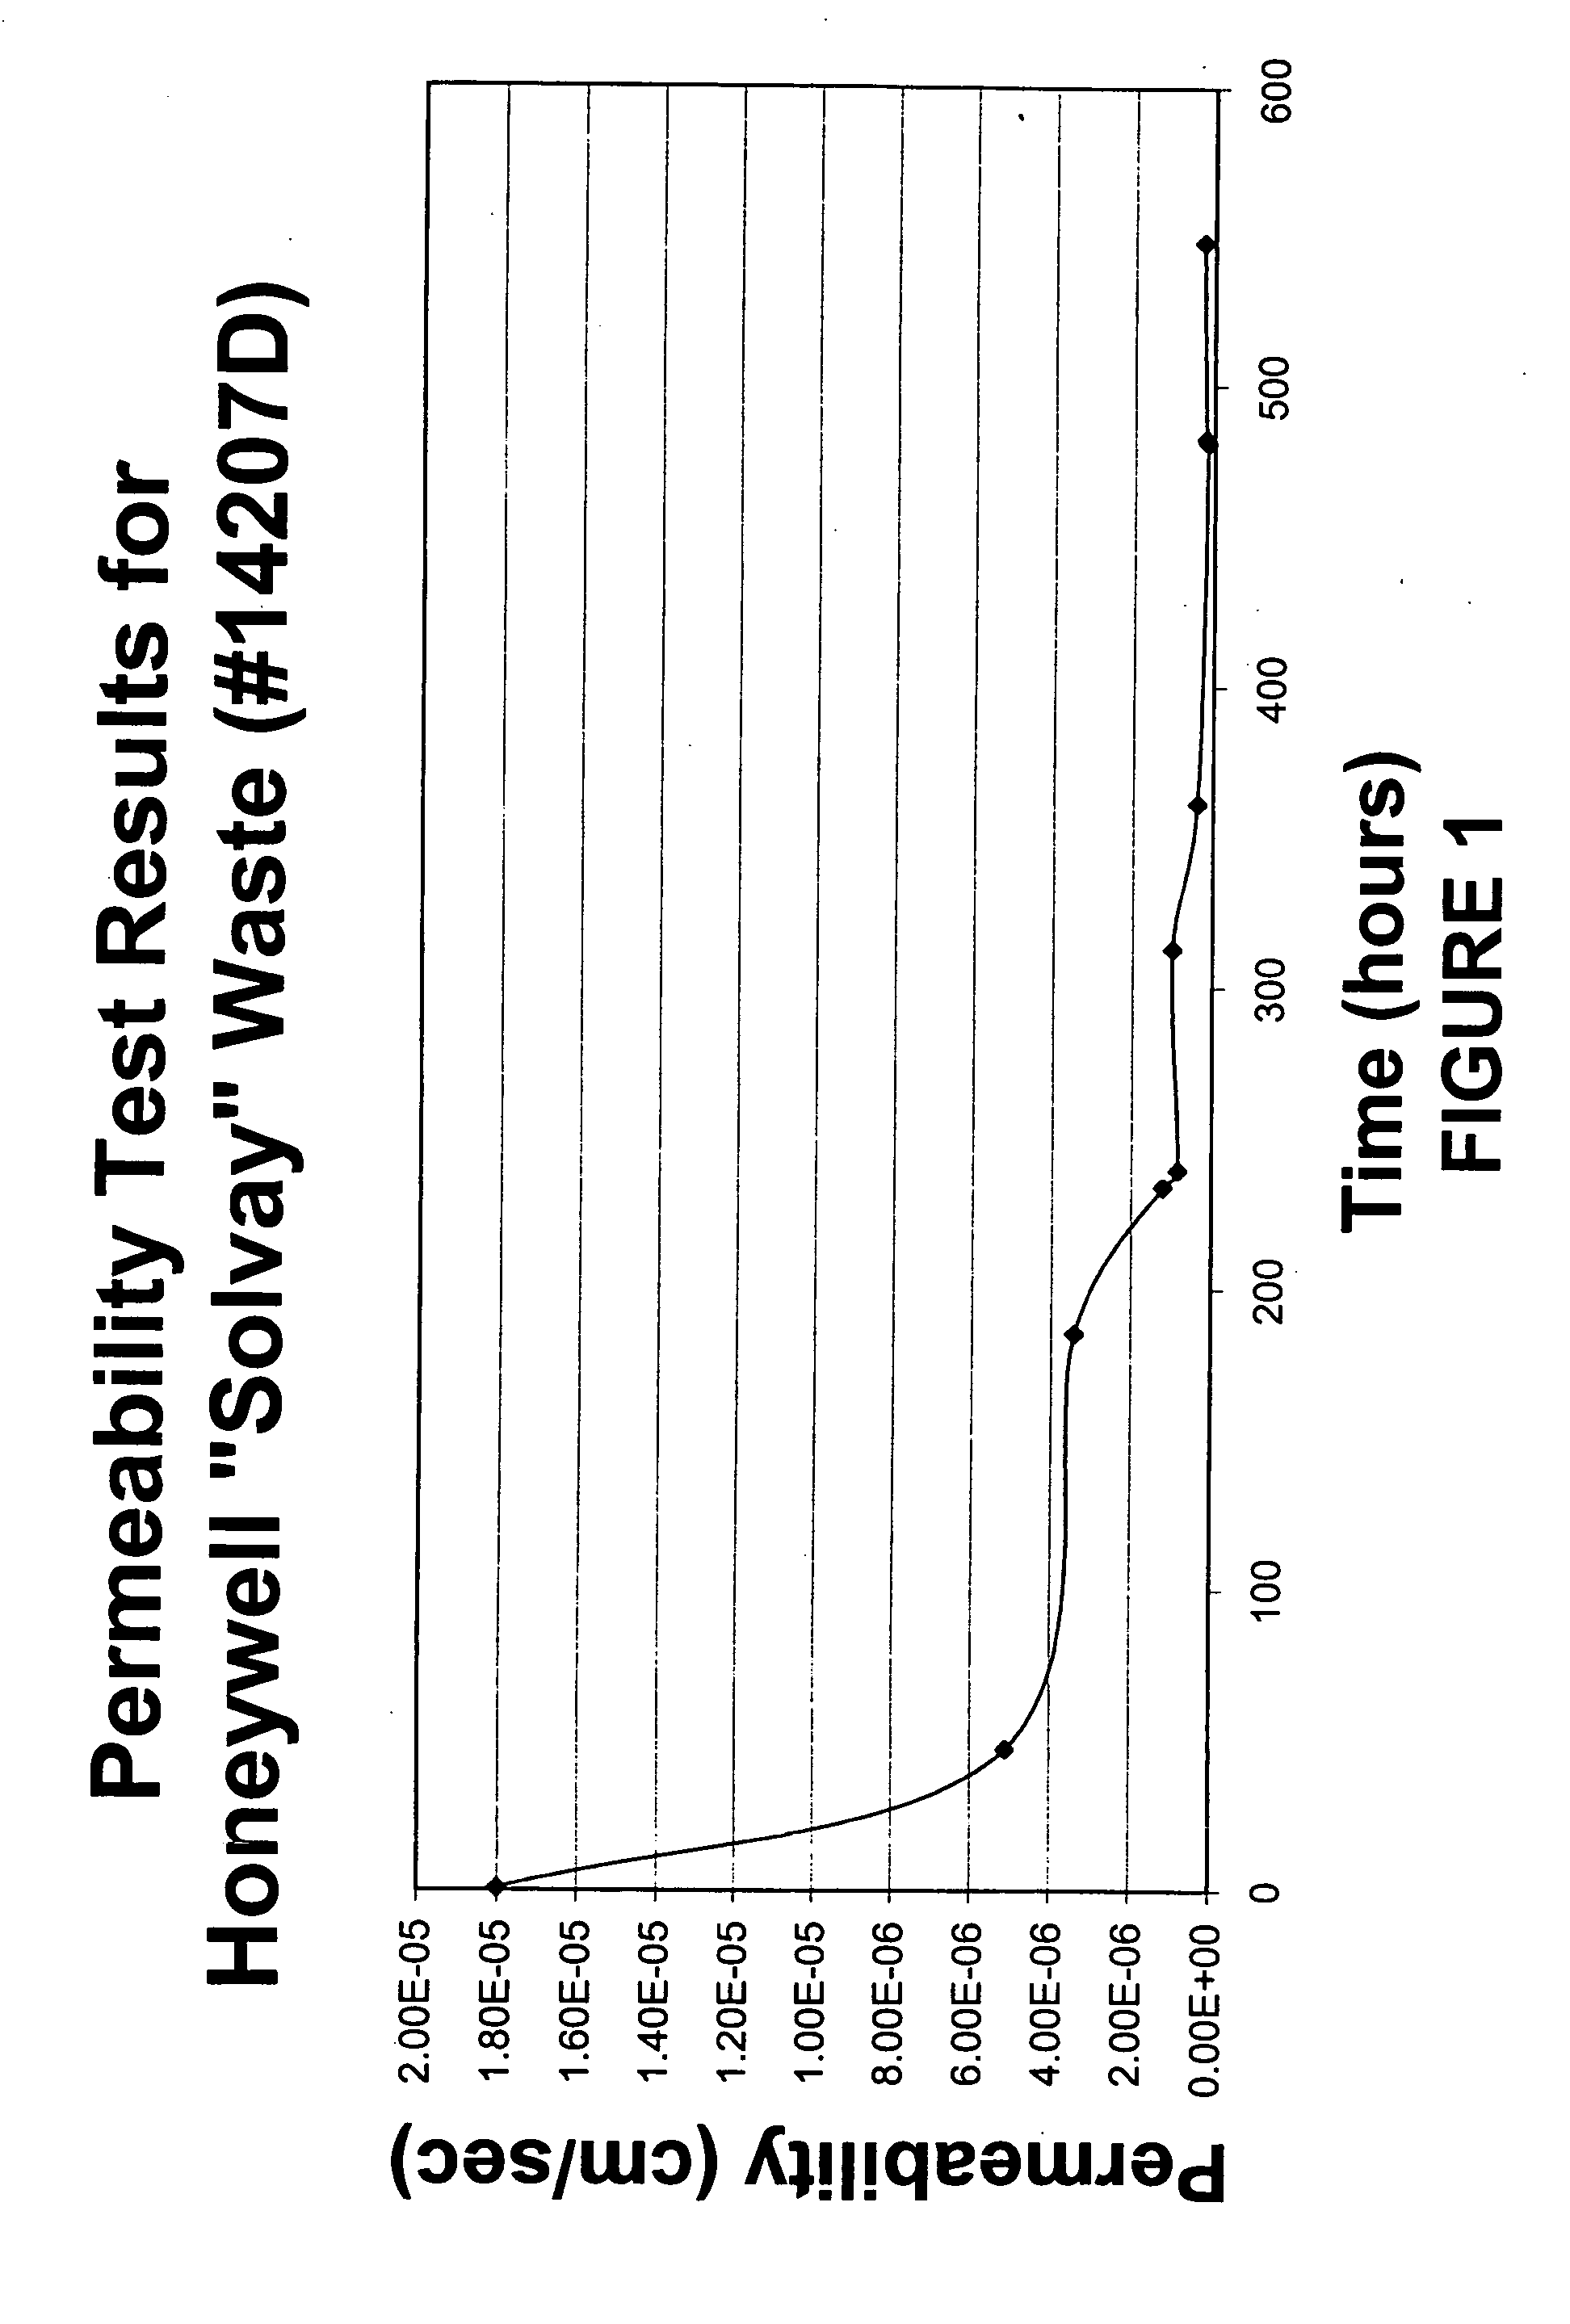 Natural analog system for reducing permeability of ground